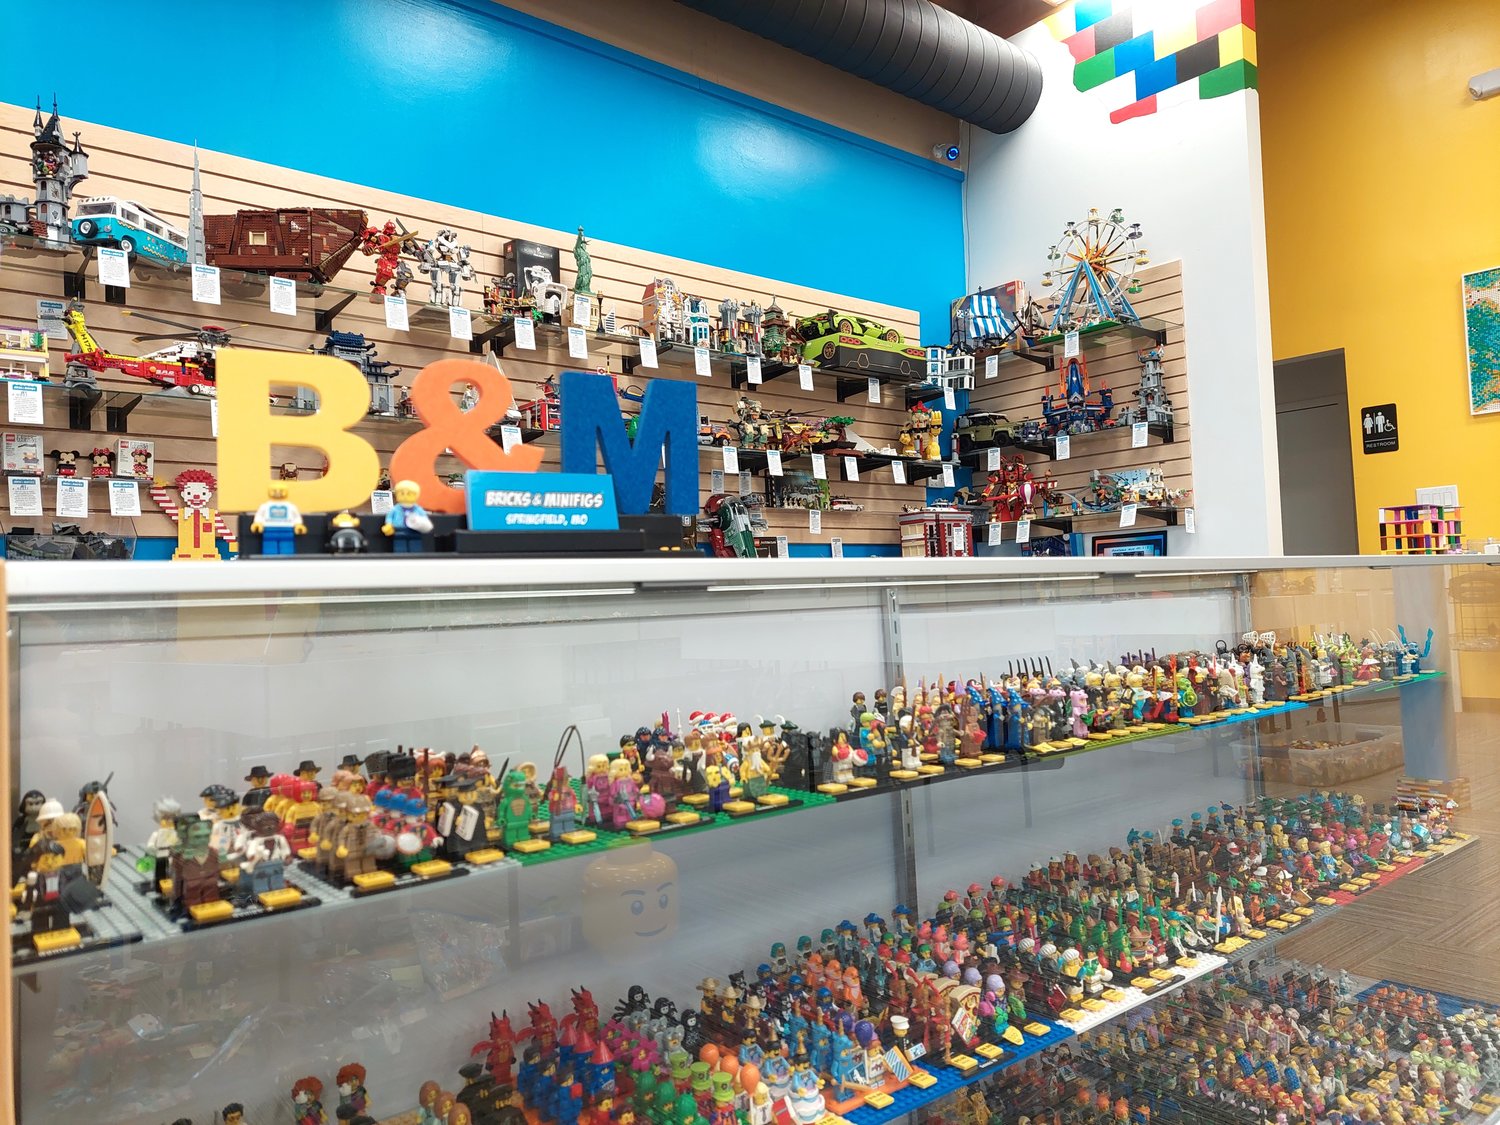 Bricks & Minifigs plans a Feb. 18 opening in the Galleria shopping center.